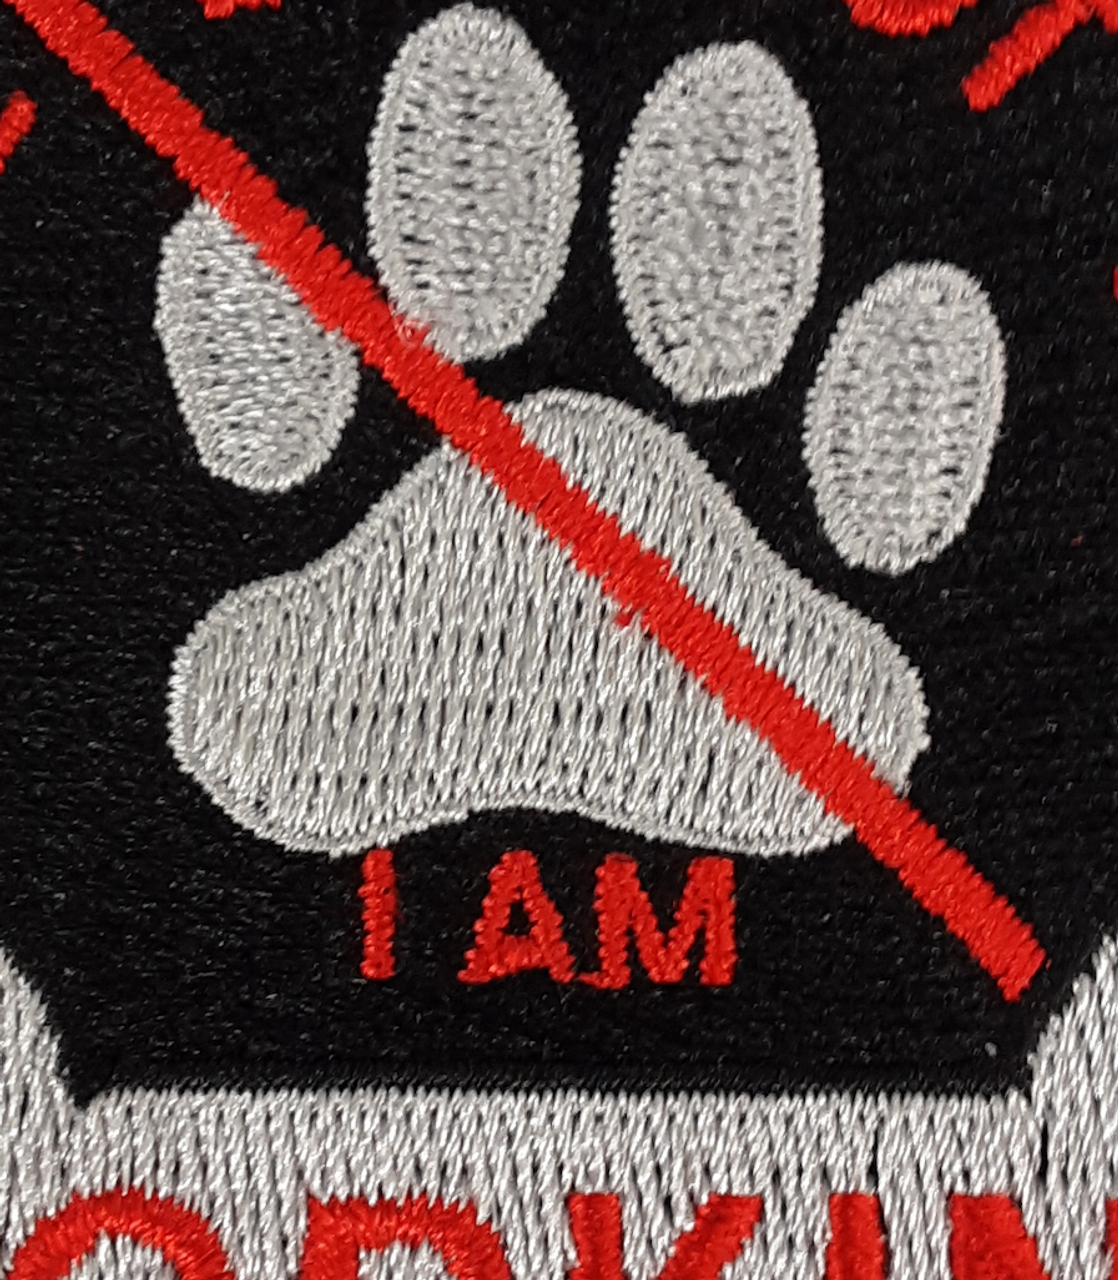 Working Dog Do Not Pet Patch Service Animal Badge Embroidered Iron